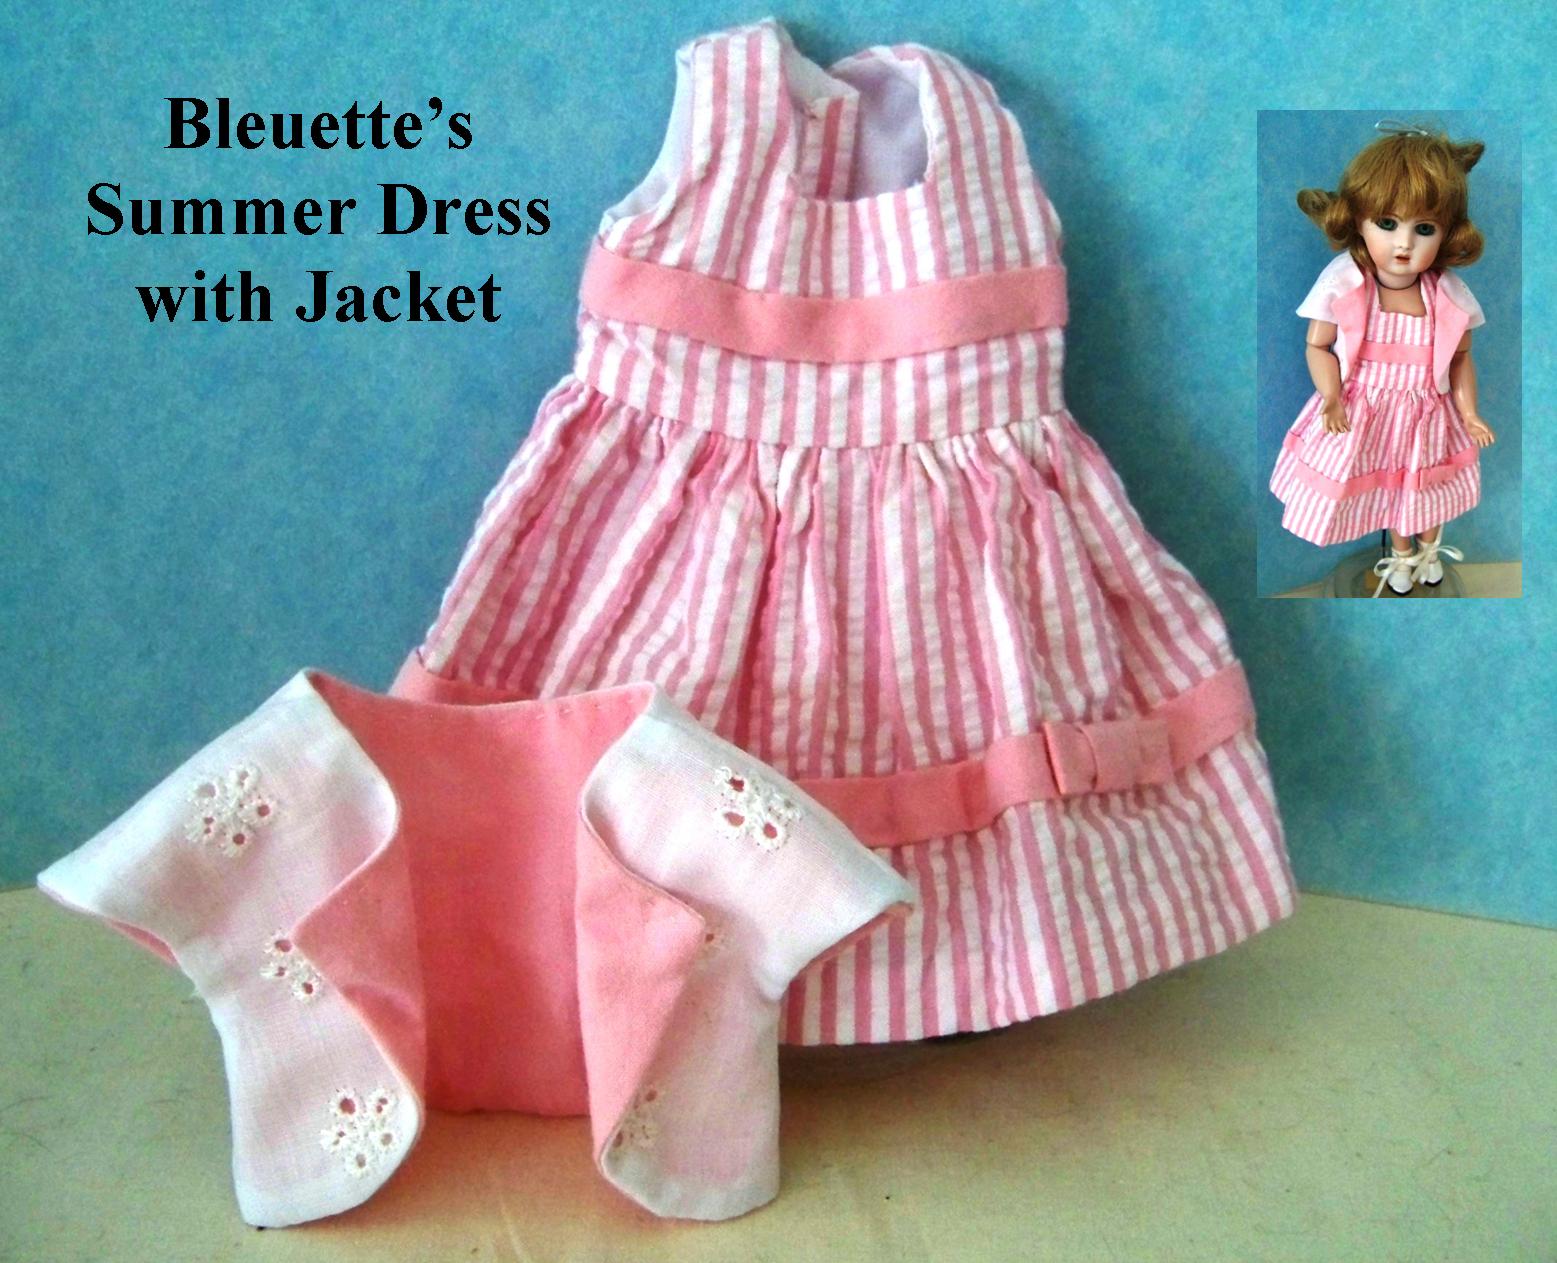 Bleuette's Summer Dress with Jacket